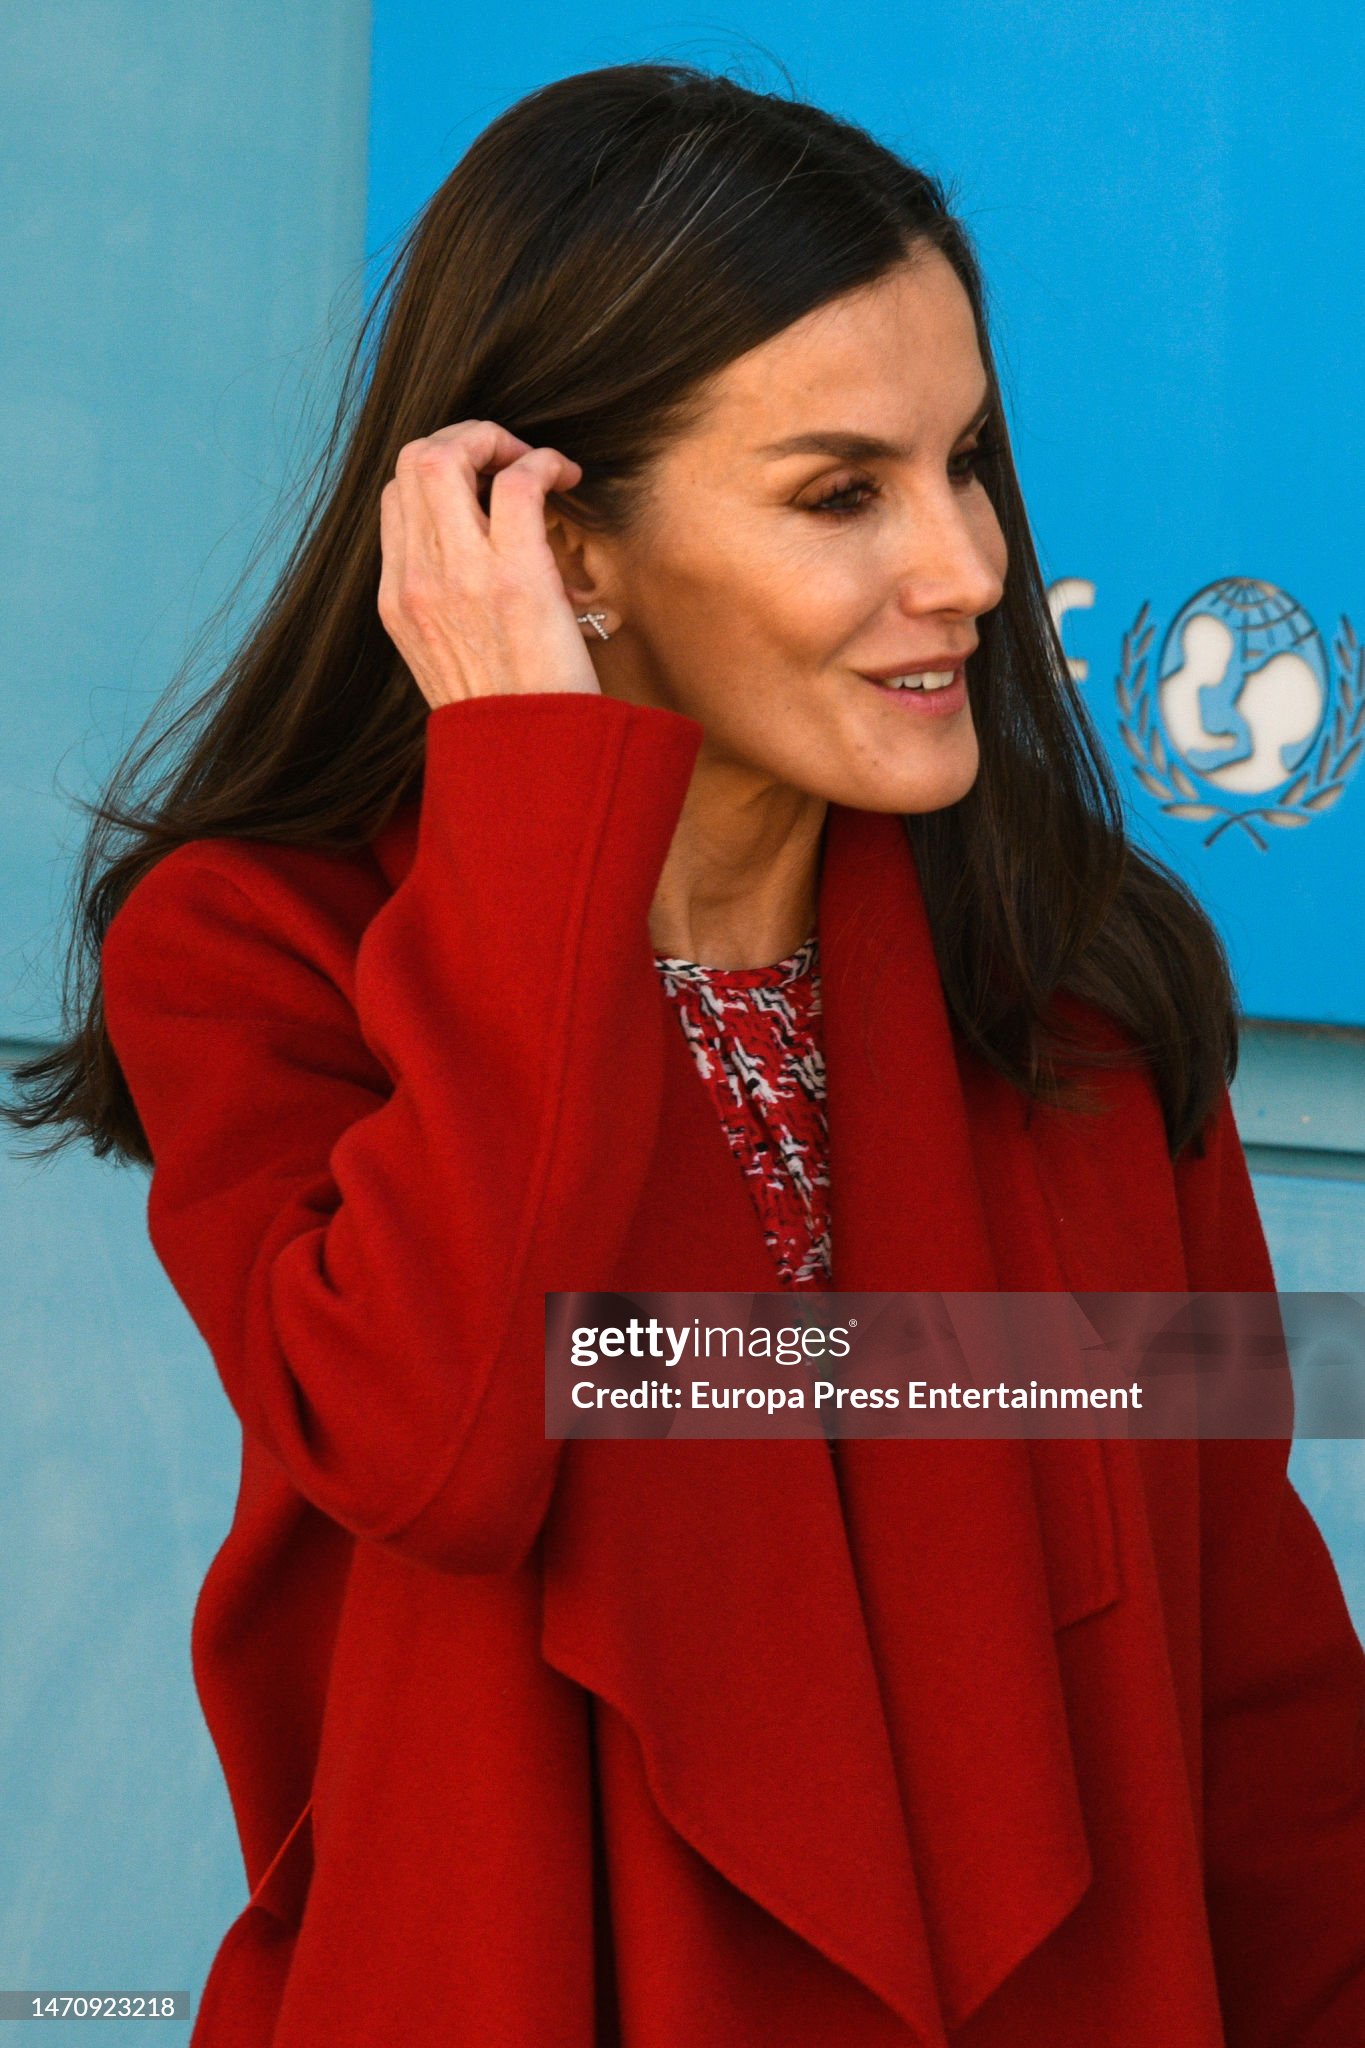 queen-letizia-presides-over-the-meeting-of-the-board-of-trustees-of-the-fundacion-unicef.jpg